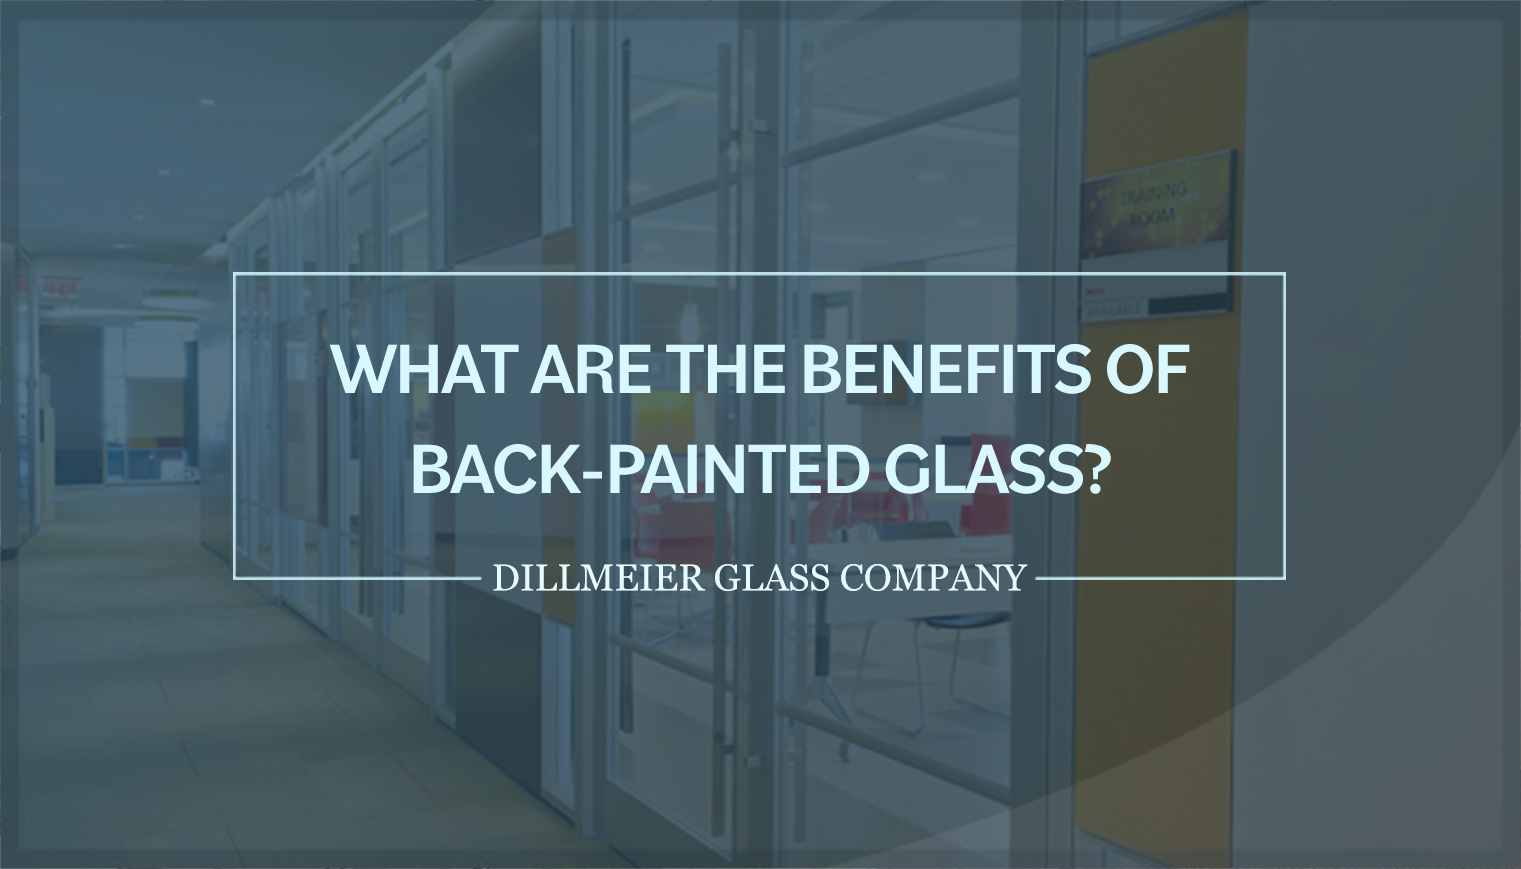 What Are the Benefits of Back-Painted Glass?